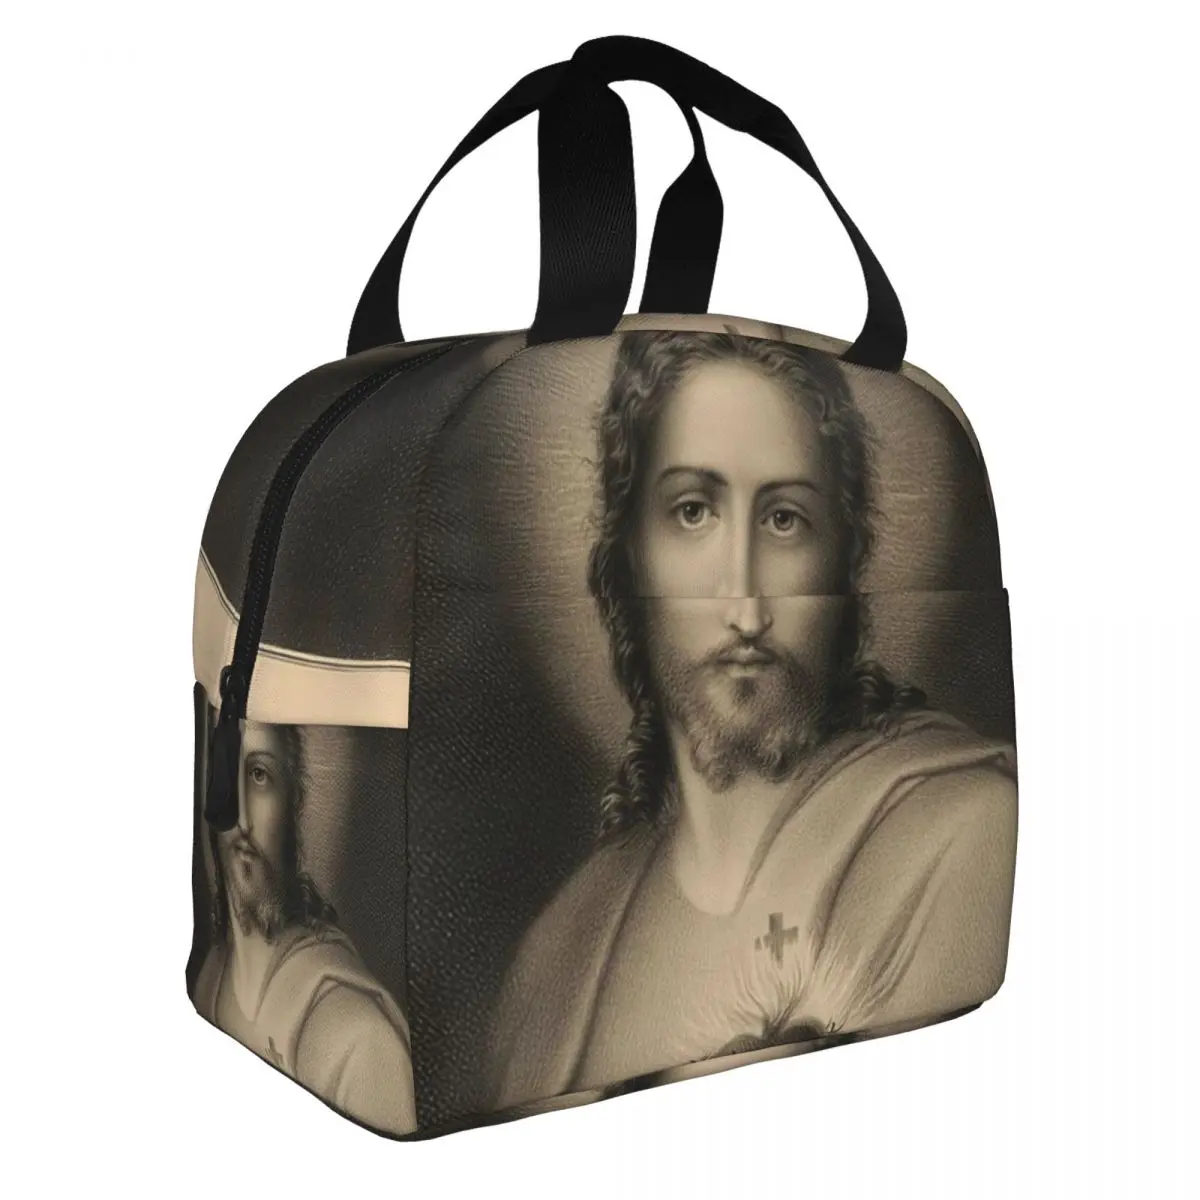 The Sacred Heart Of Jesus Lunch Bento Bags Portable Aluminum Foil thickened Thermal Cloth Lunch Bag for Women Men Boy